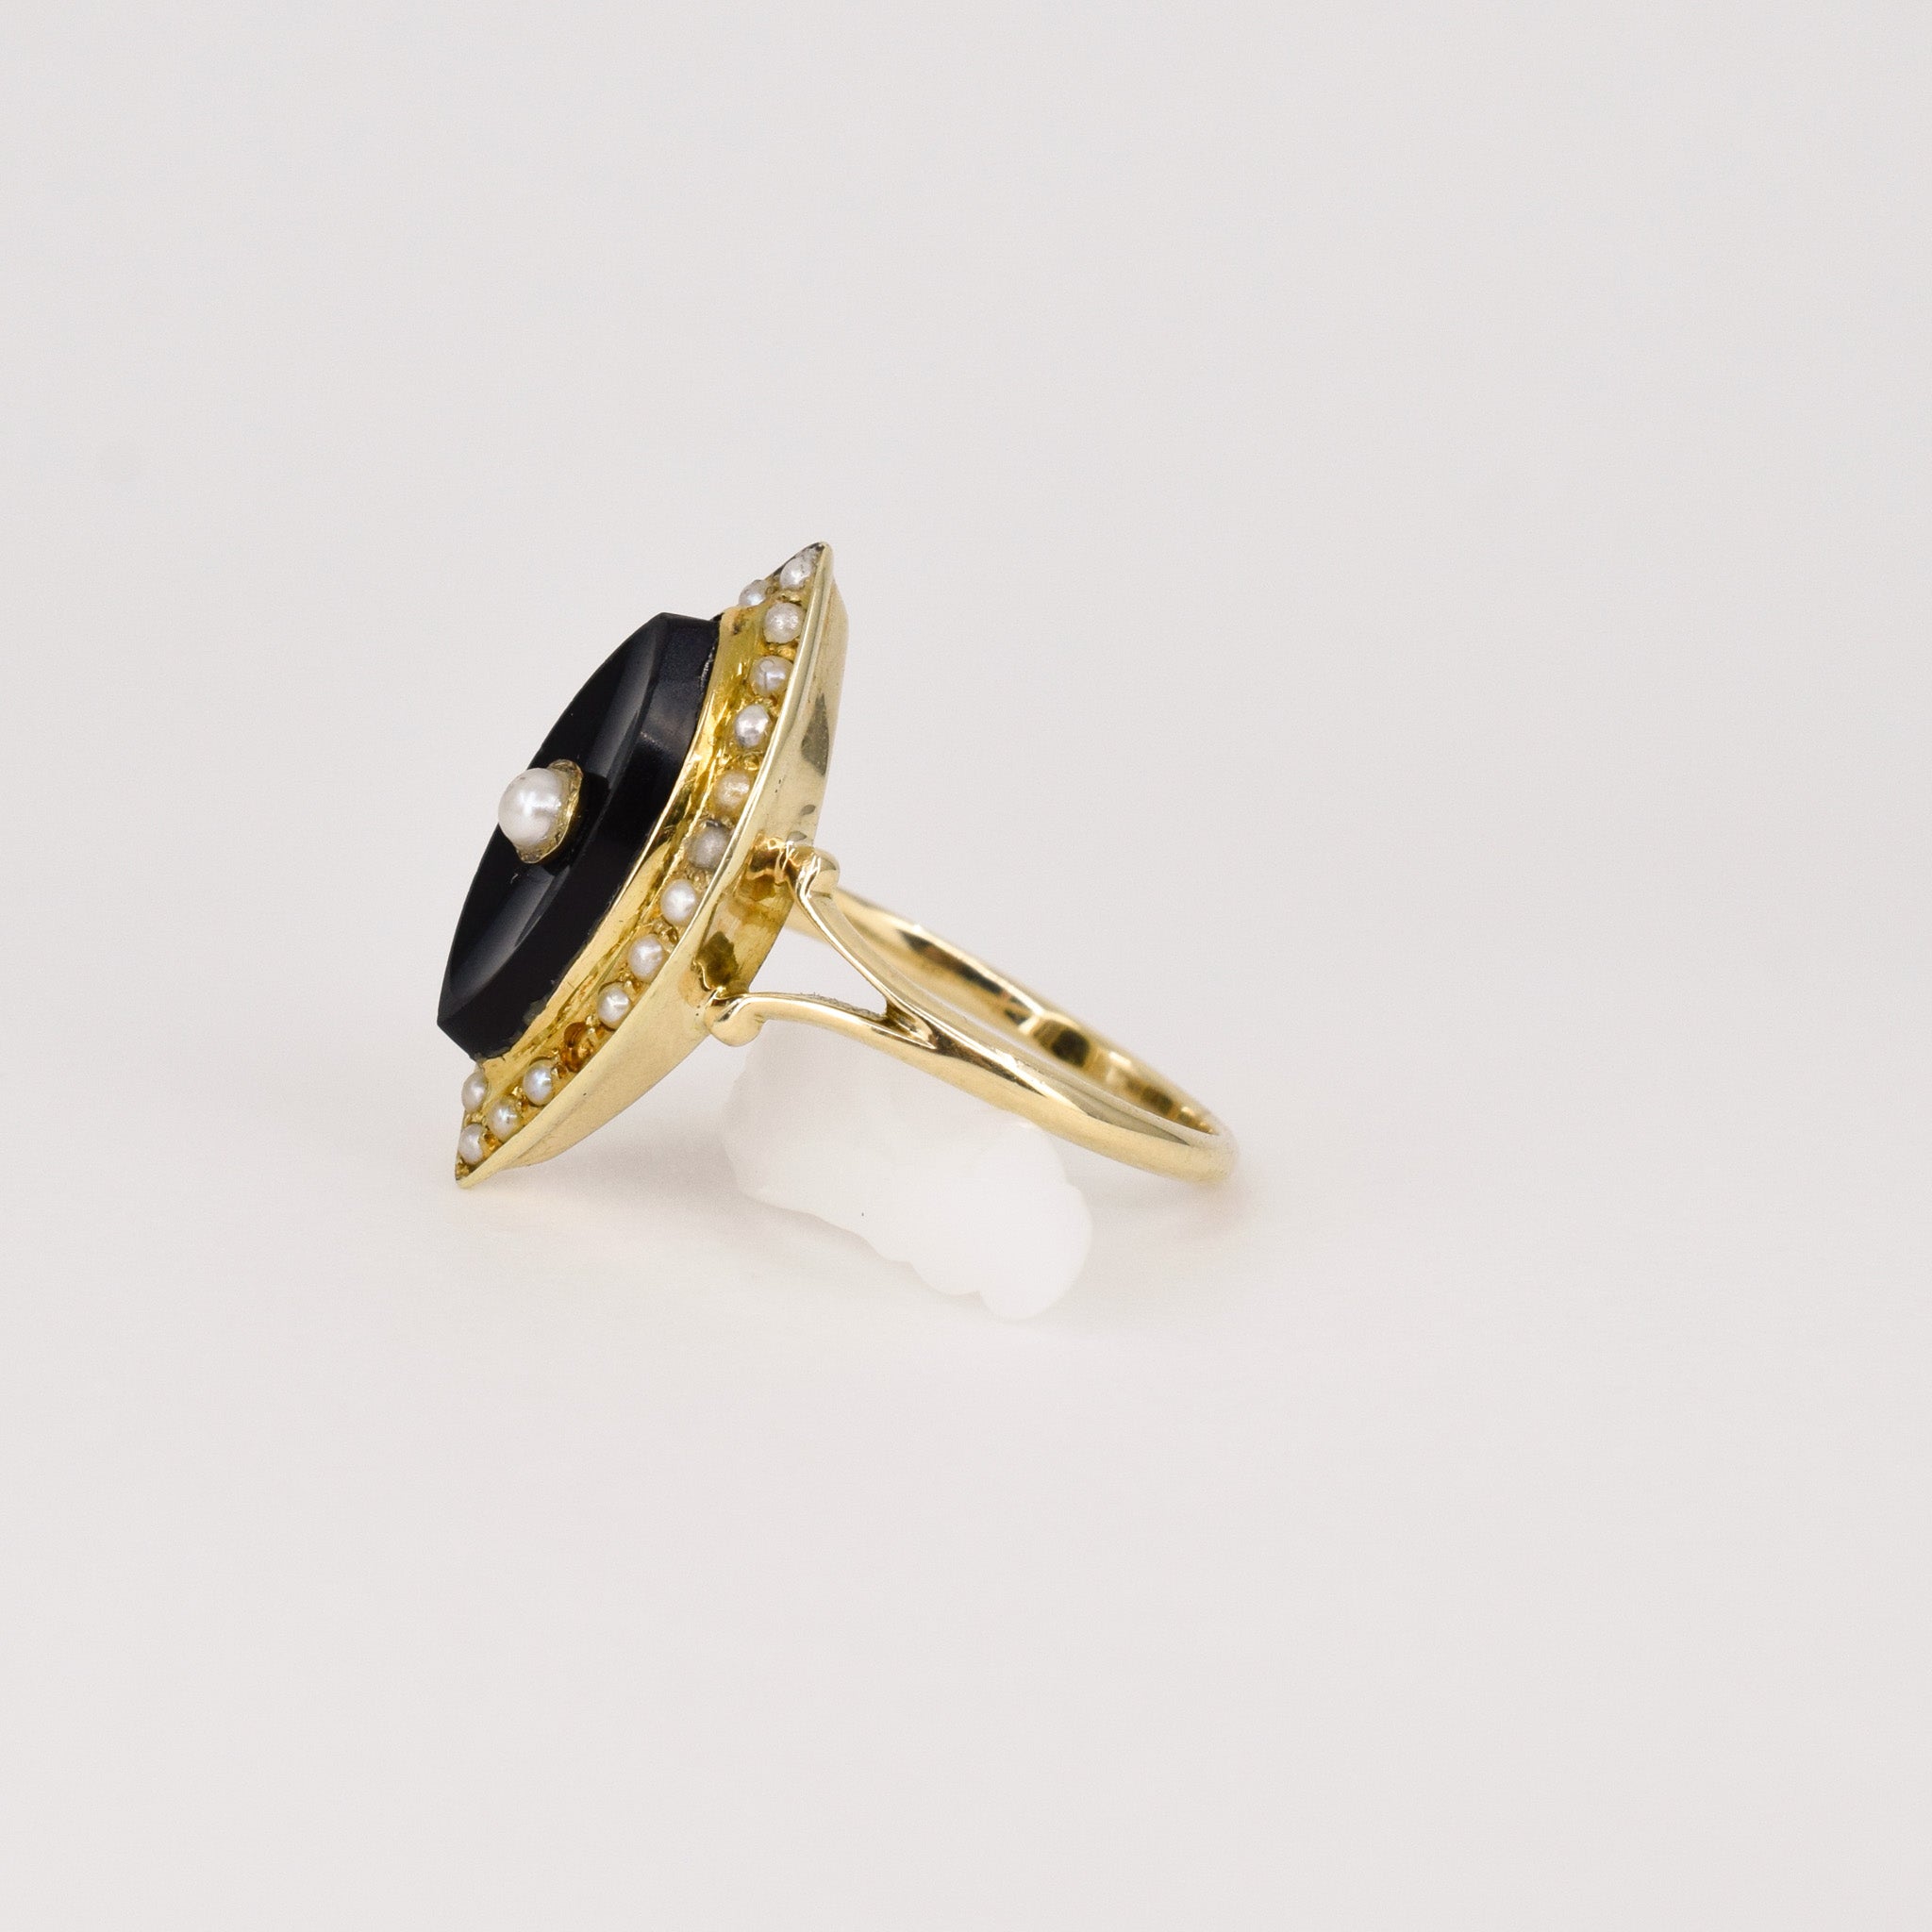 antique onyx and seed pearl ring, folkor vintage jewelry canada 